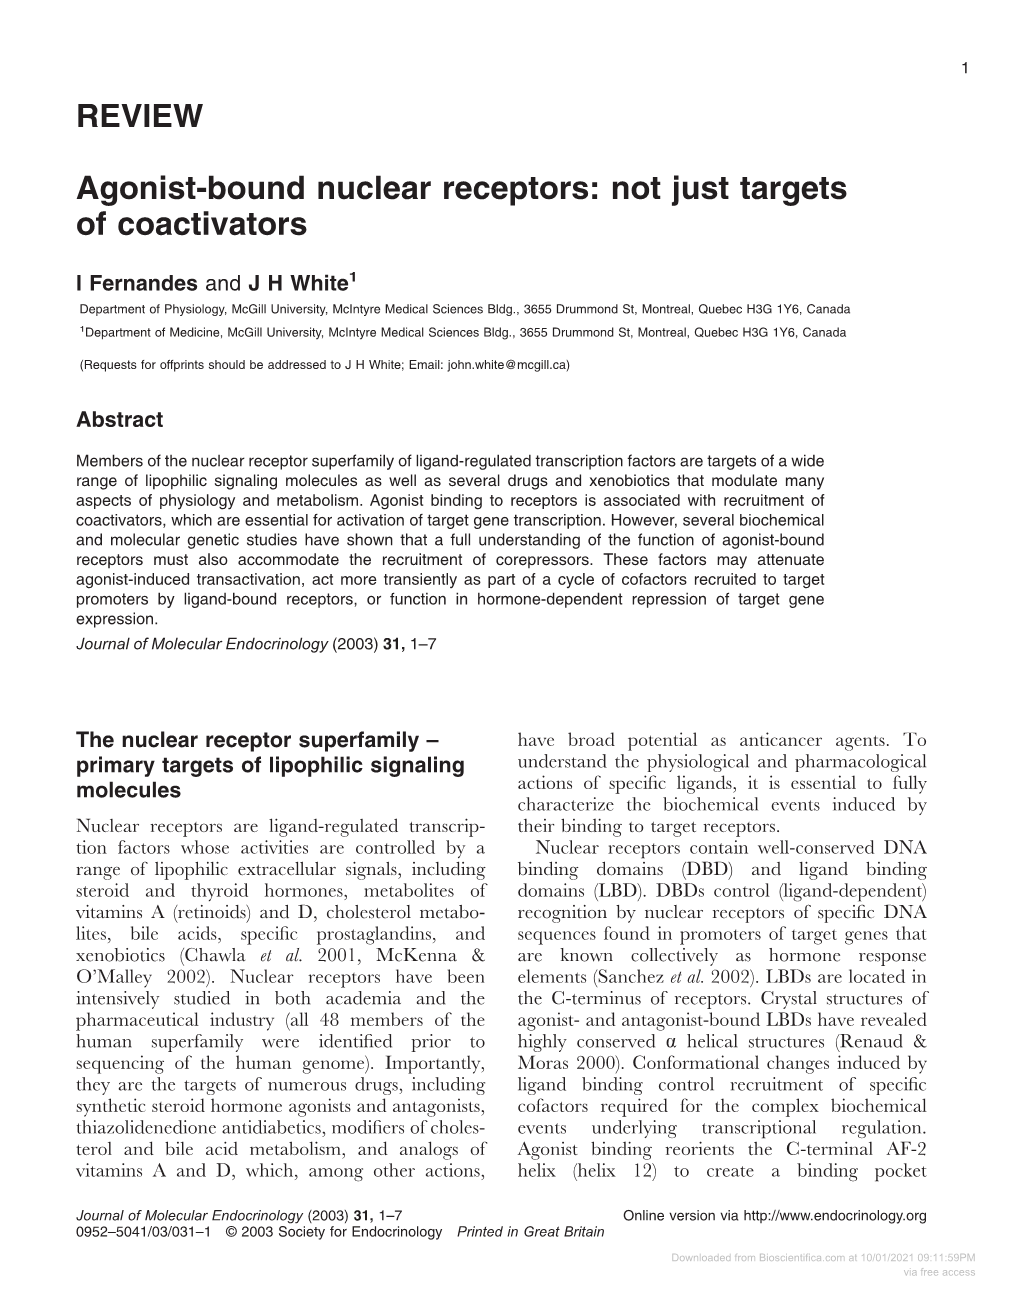 REVIEW Agonist-Bound Nuclear Receptors